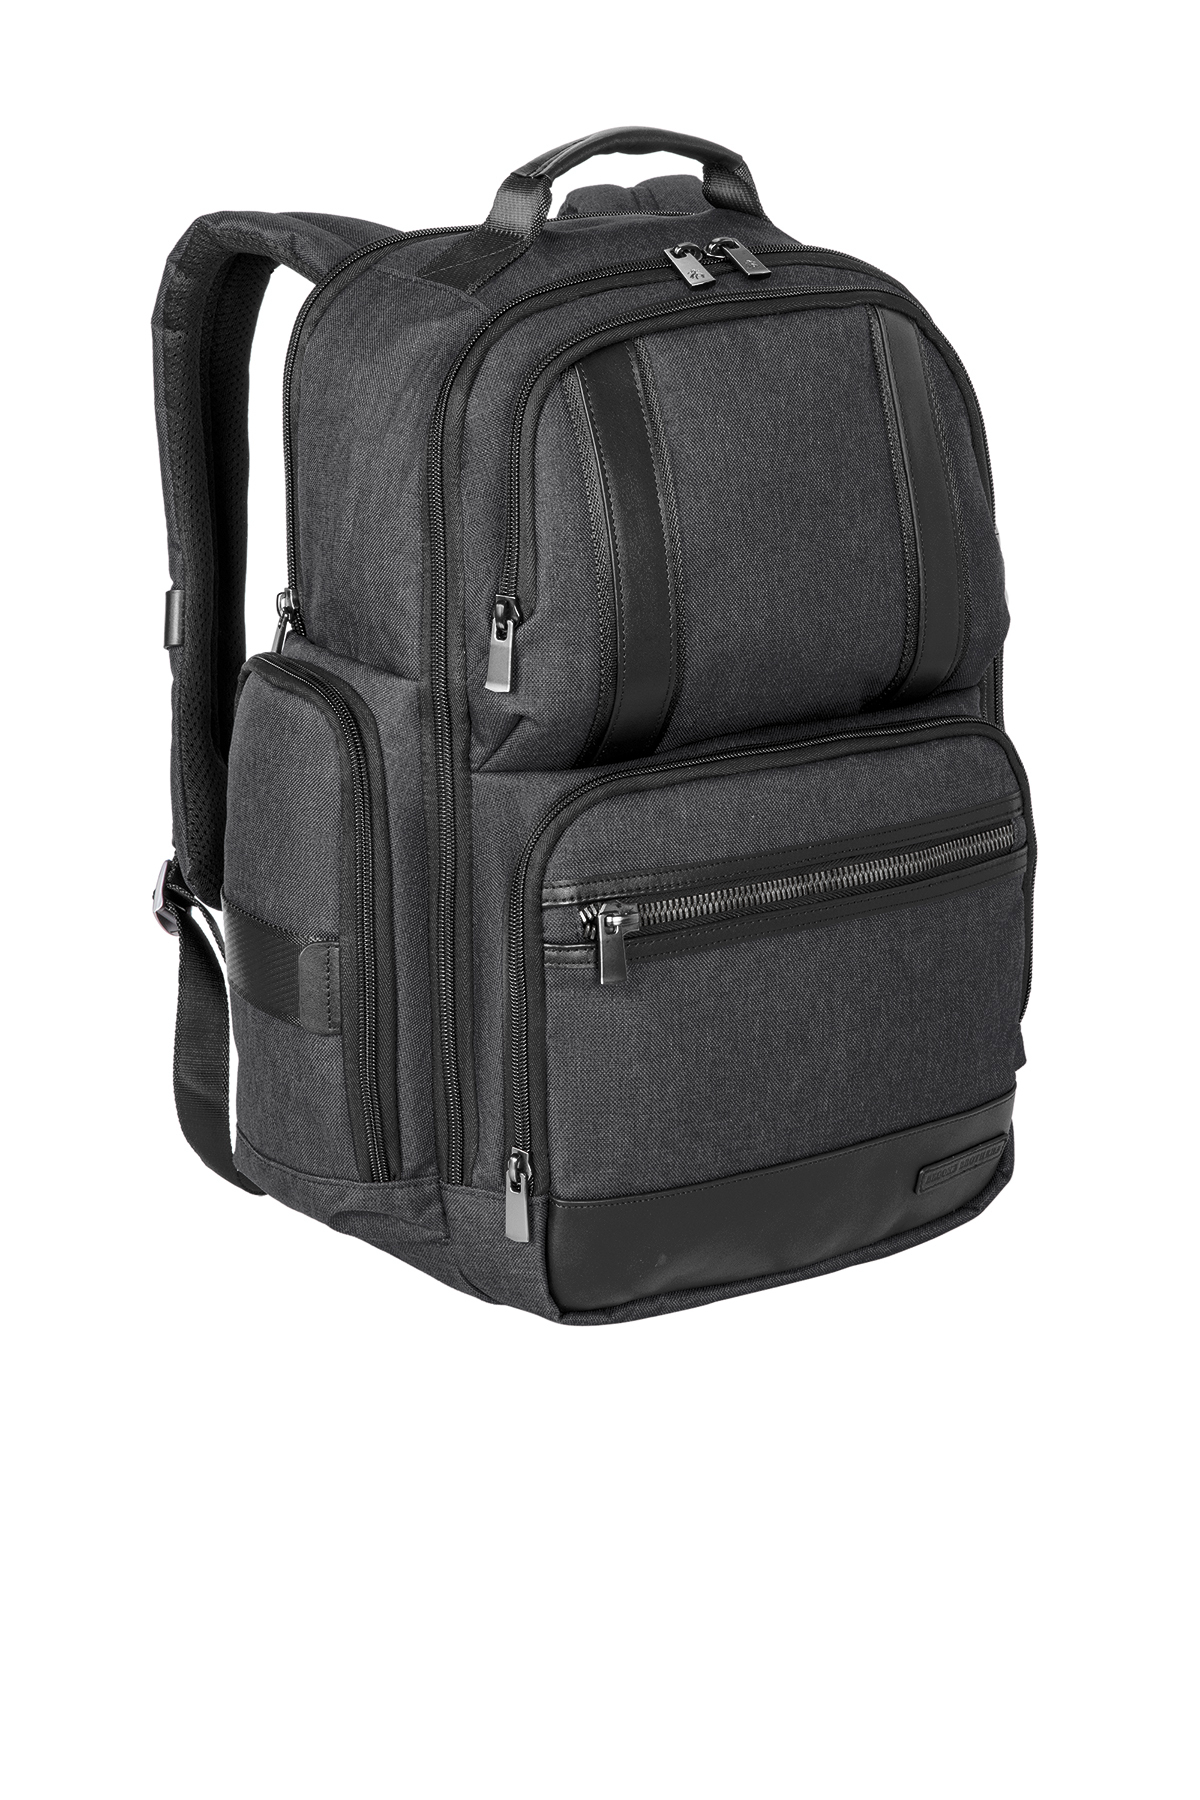 Brooks Brothers Grant Backpack | Product | SanMar